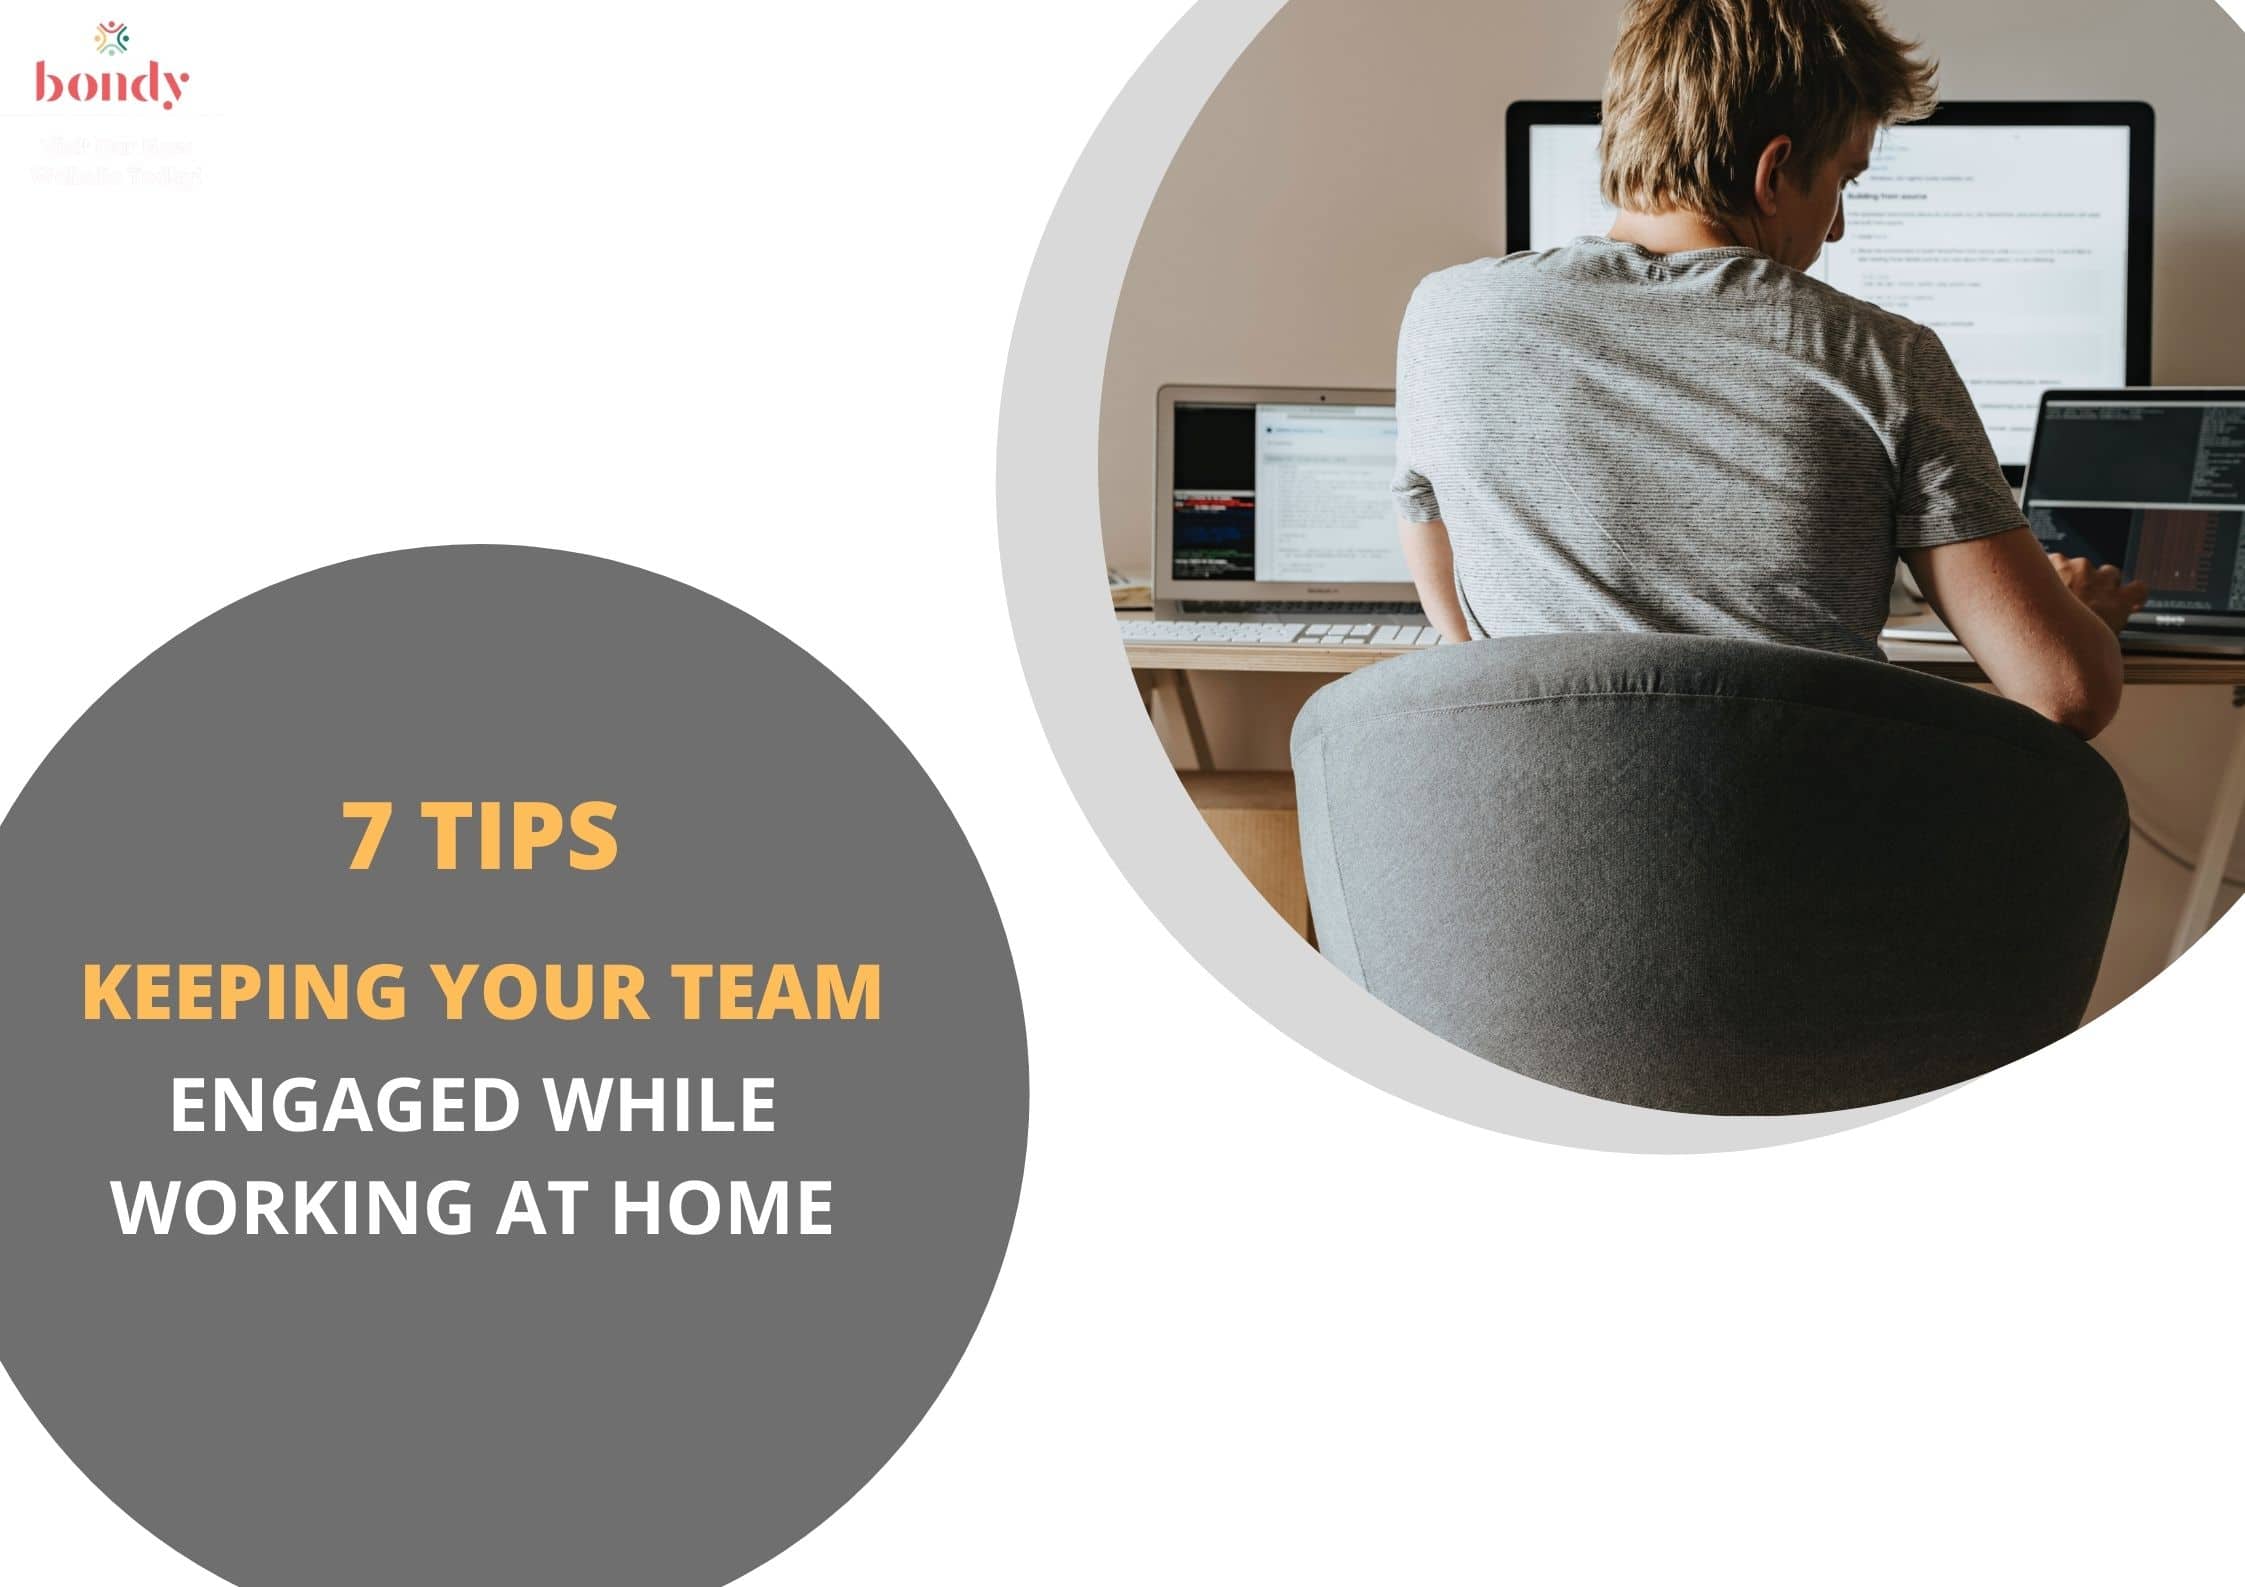 Keep Your Team Engaged While Working at Home